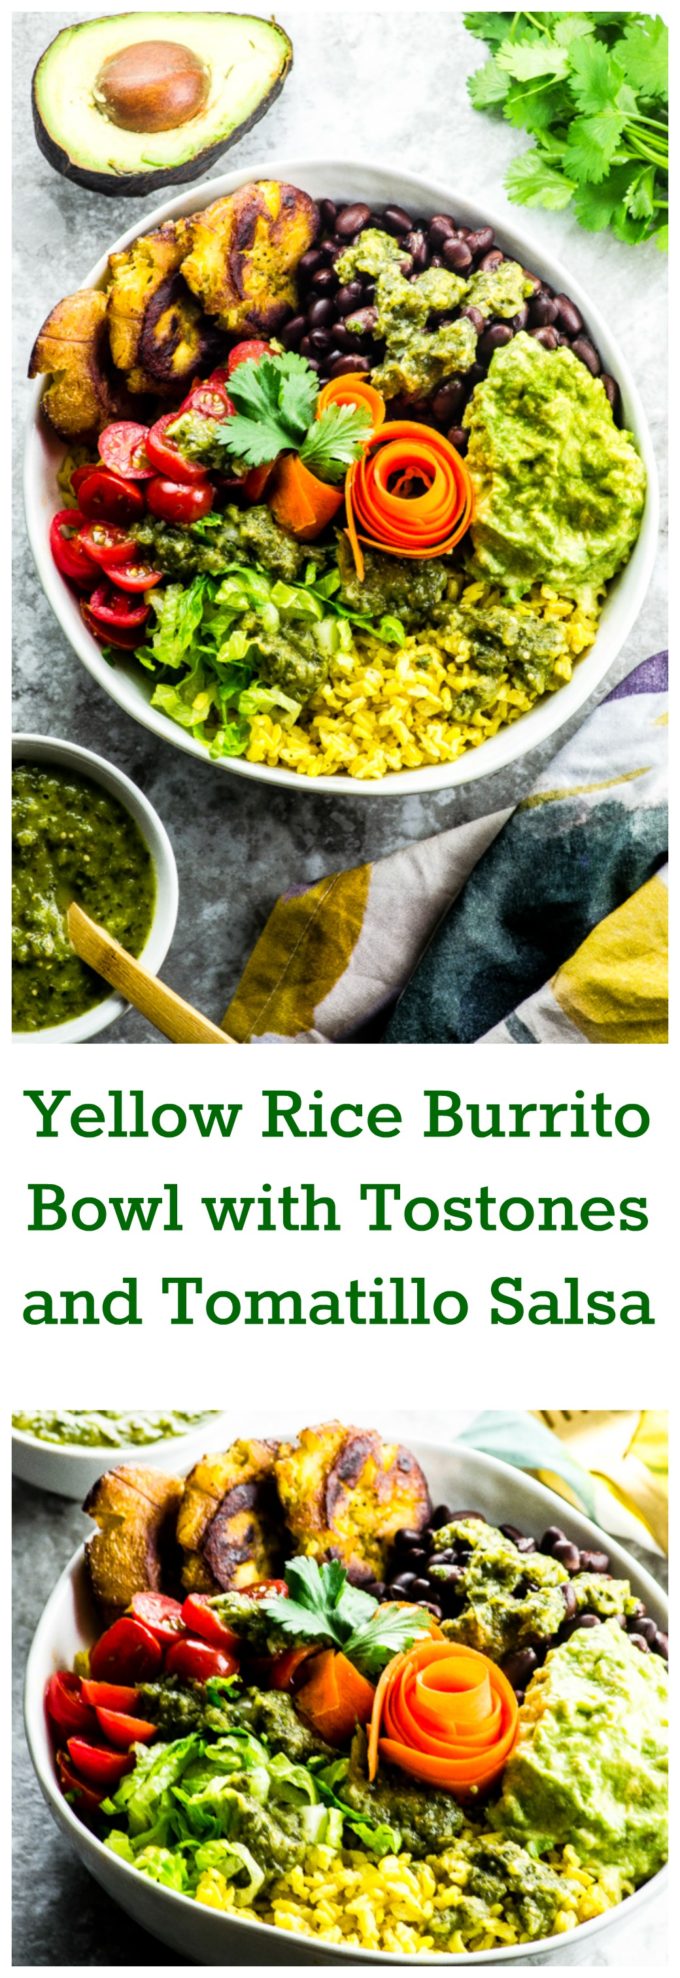 Yellow rice burrito bowl with tostones and tomatillo salsa - great Mexican inspired recipe - vegetarian, vegan , gluten free